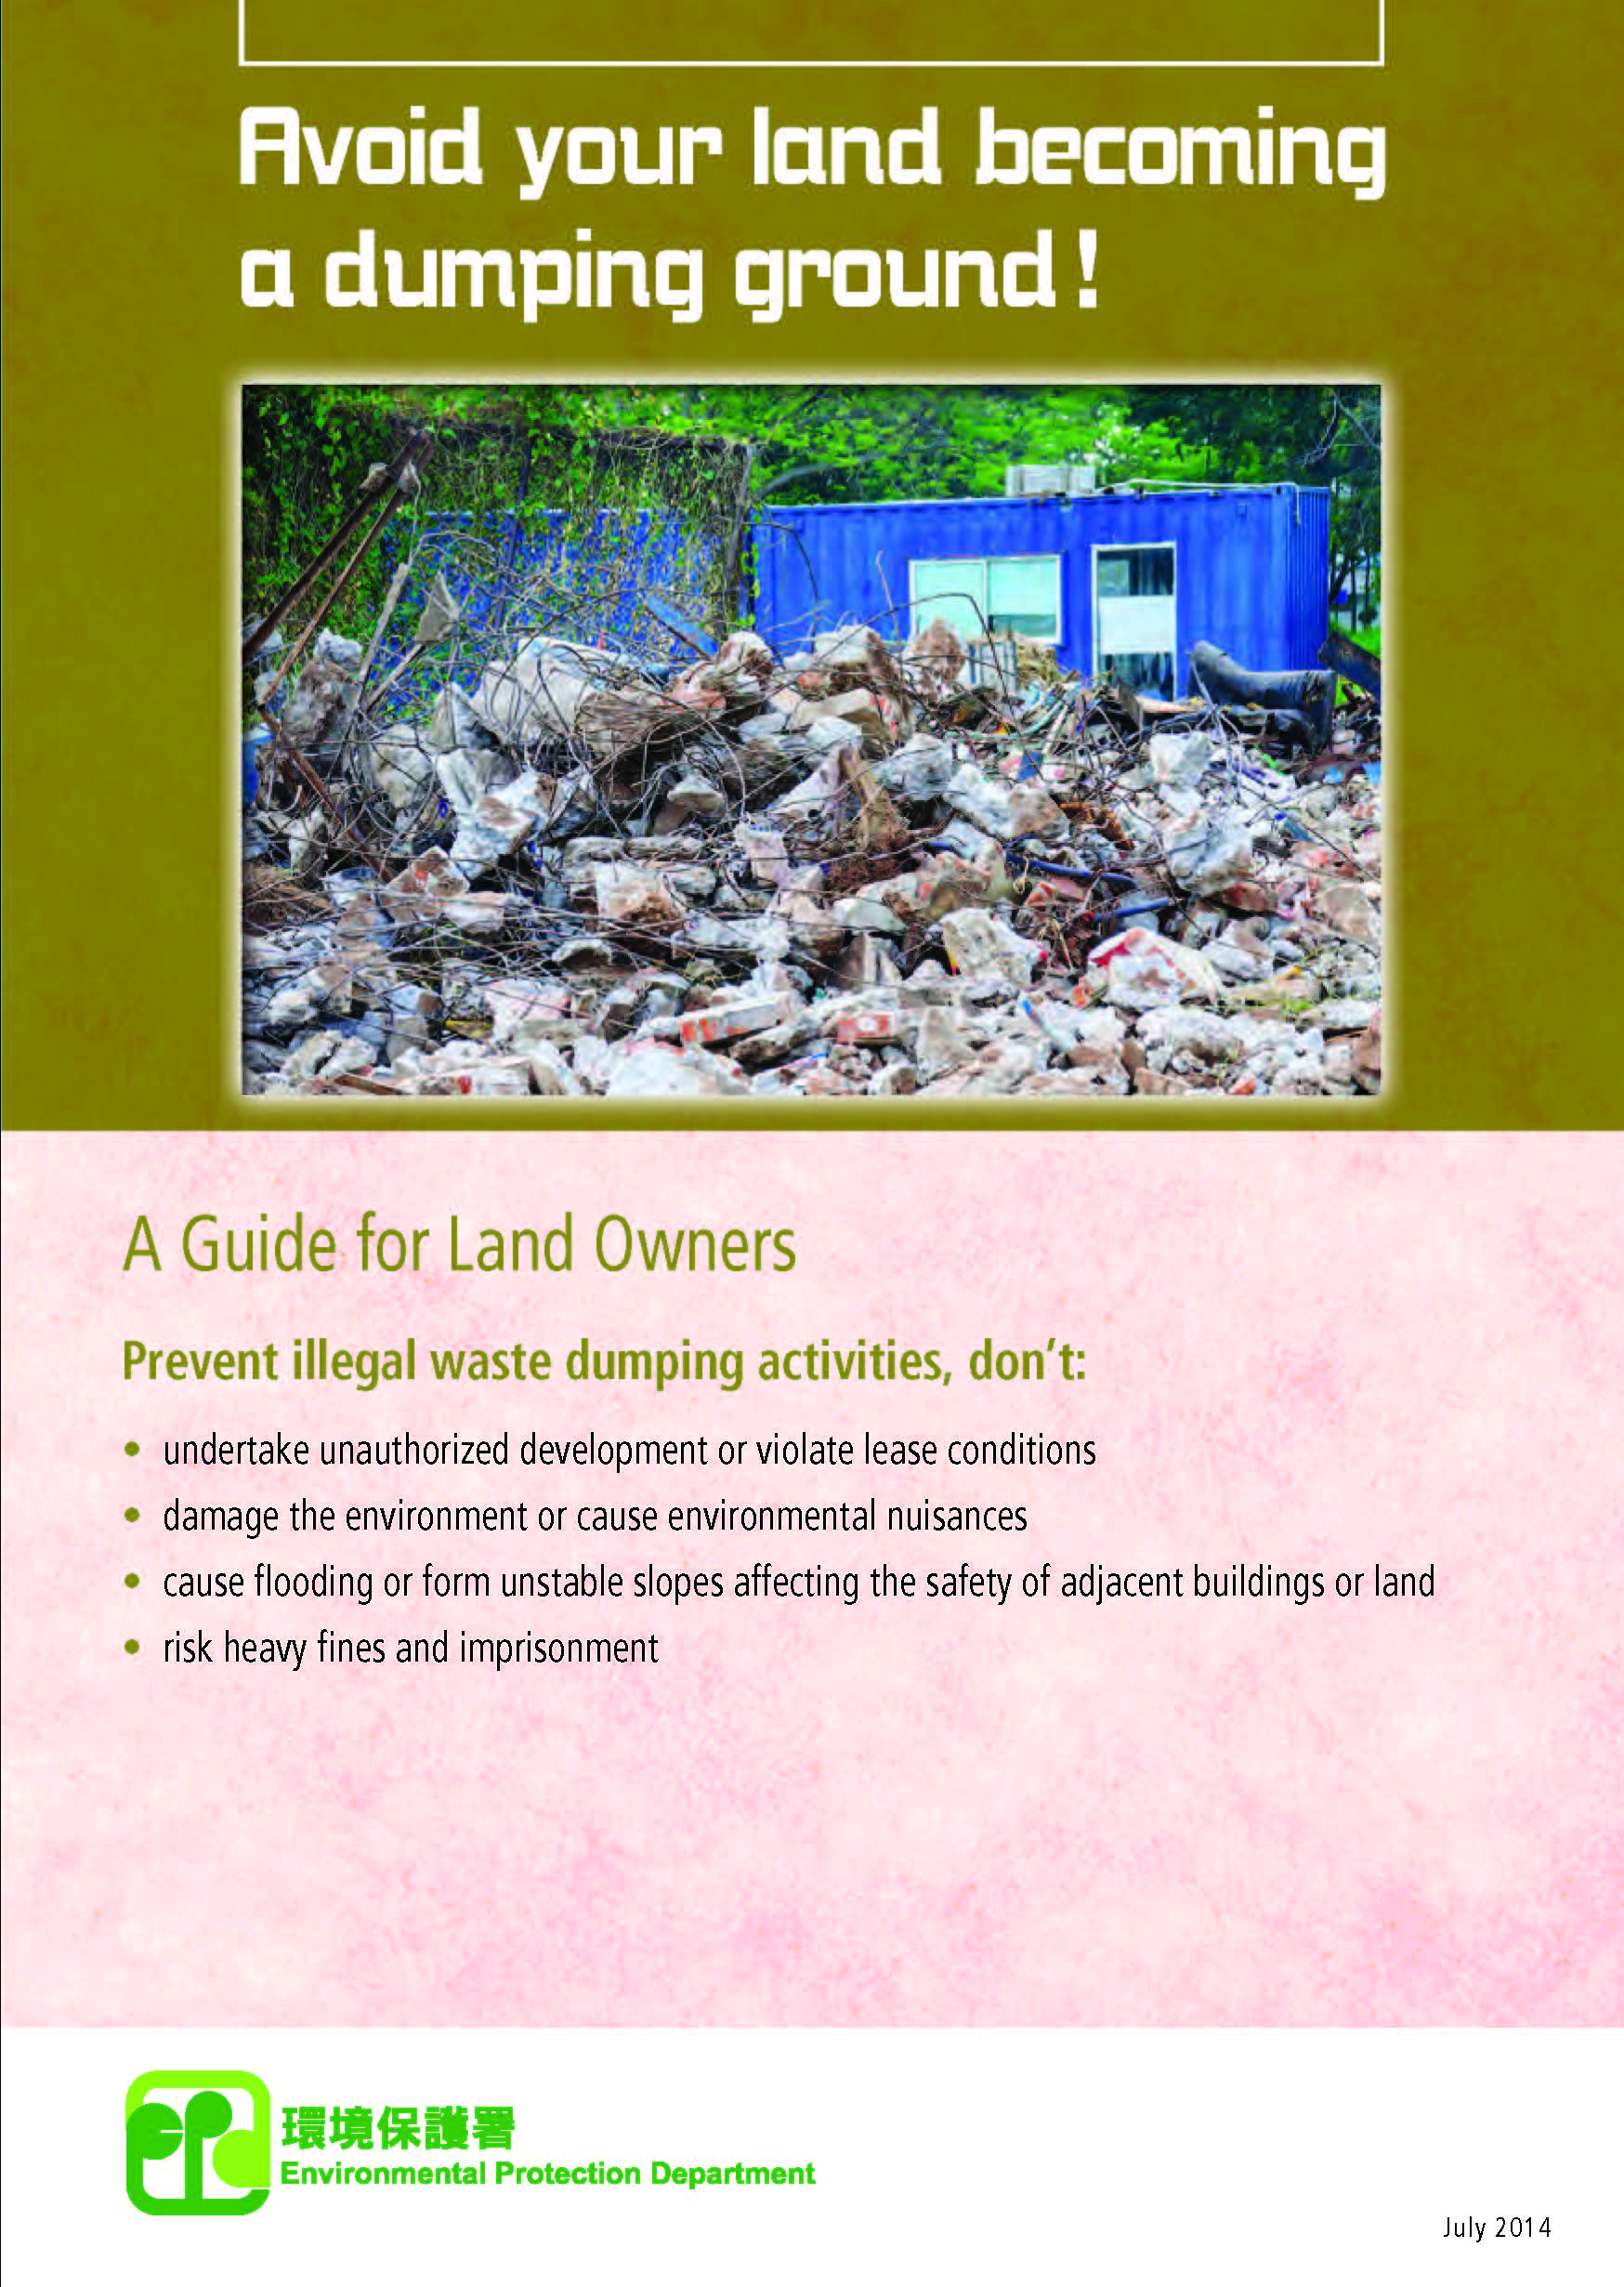 Leaflet for Land Owners